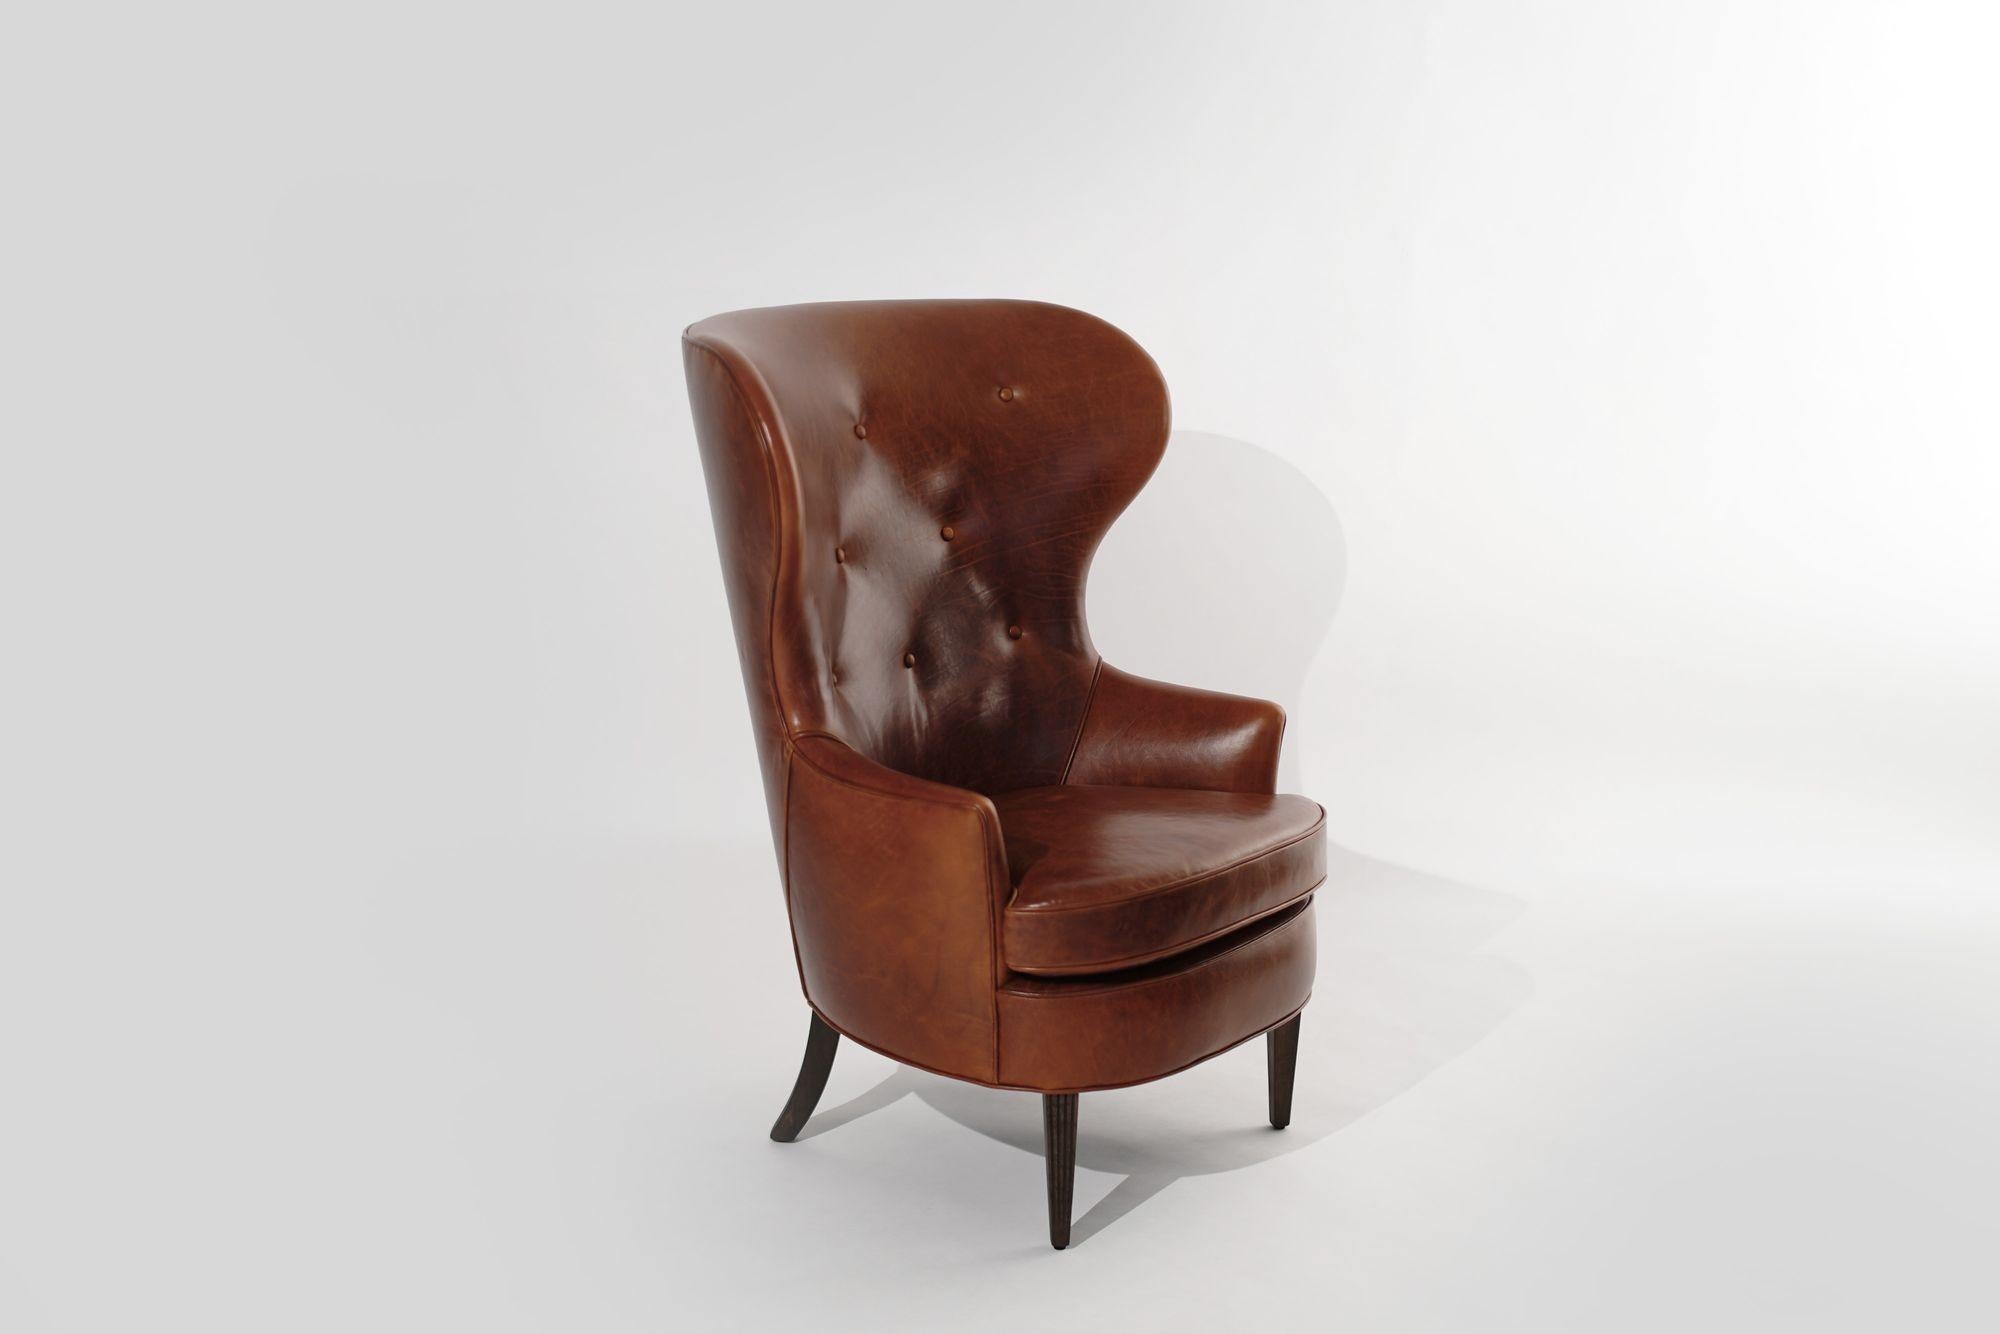 Mid-Century Modern Vintage Wingback Chair in Cognac Leather, C. 1950s For Sale